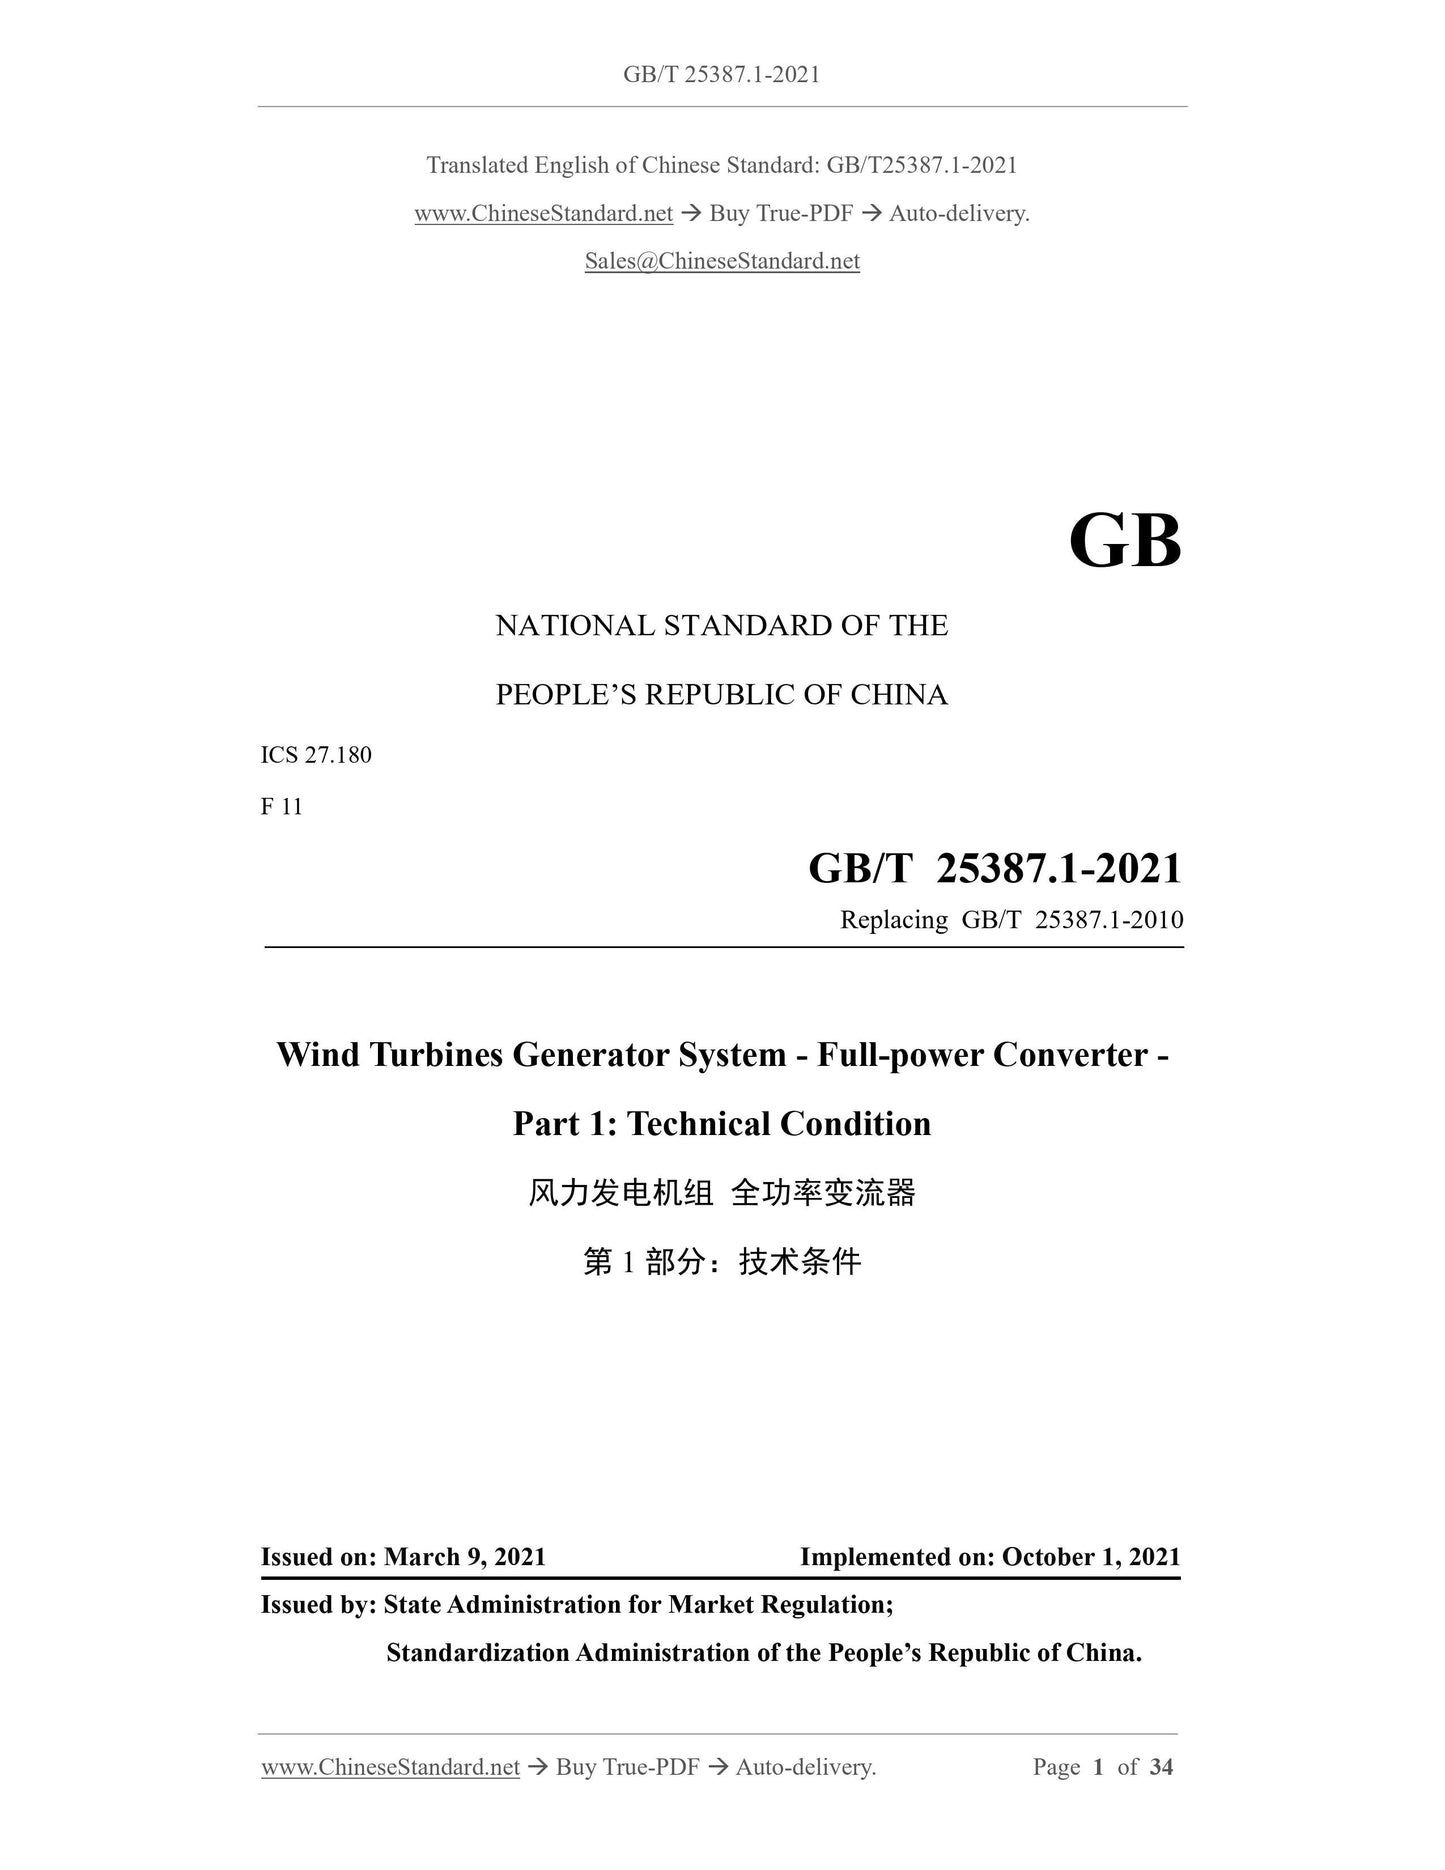 GB/T 25387.1-2021 Page 1